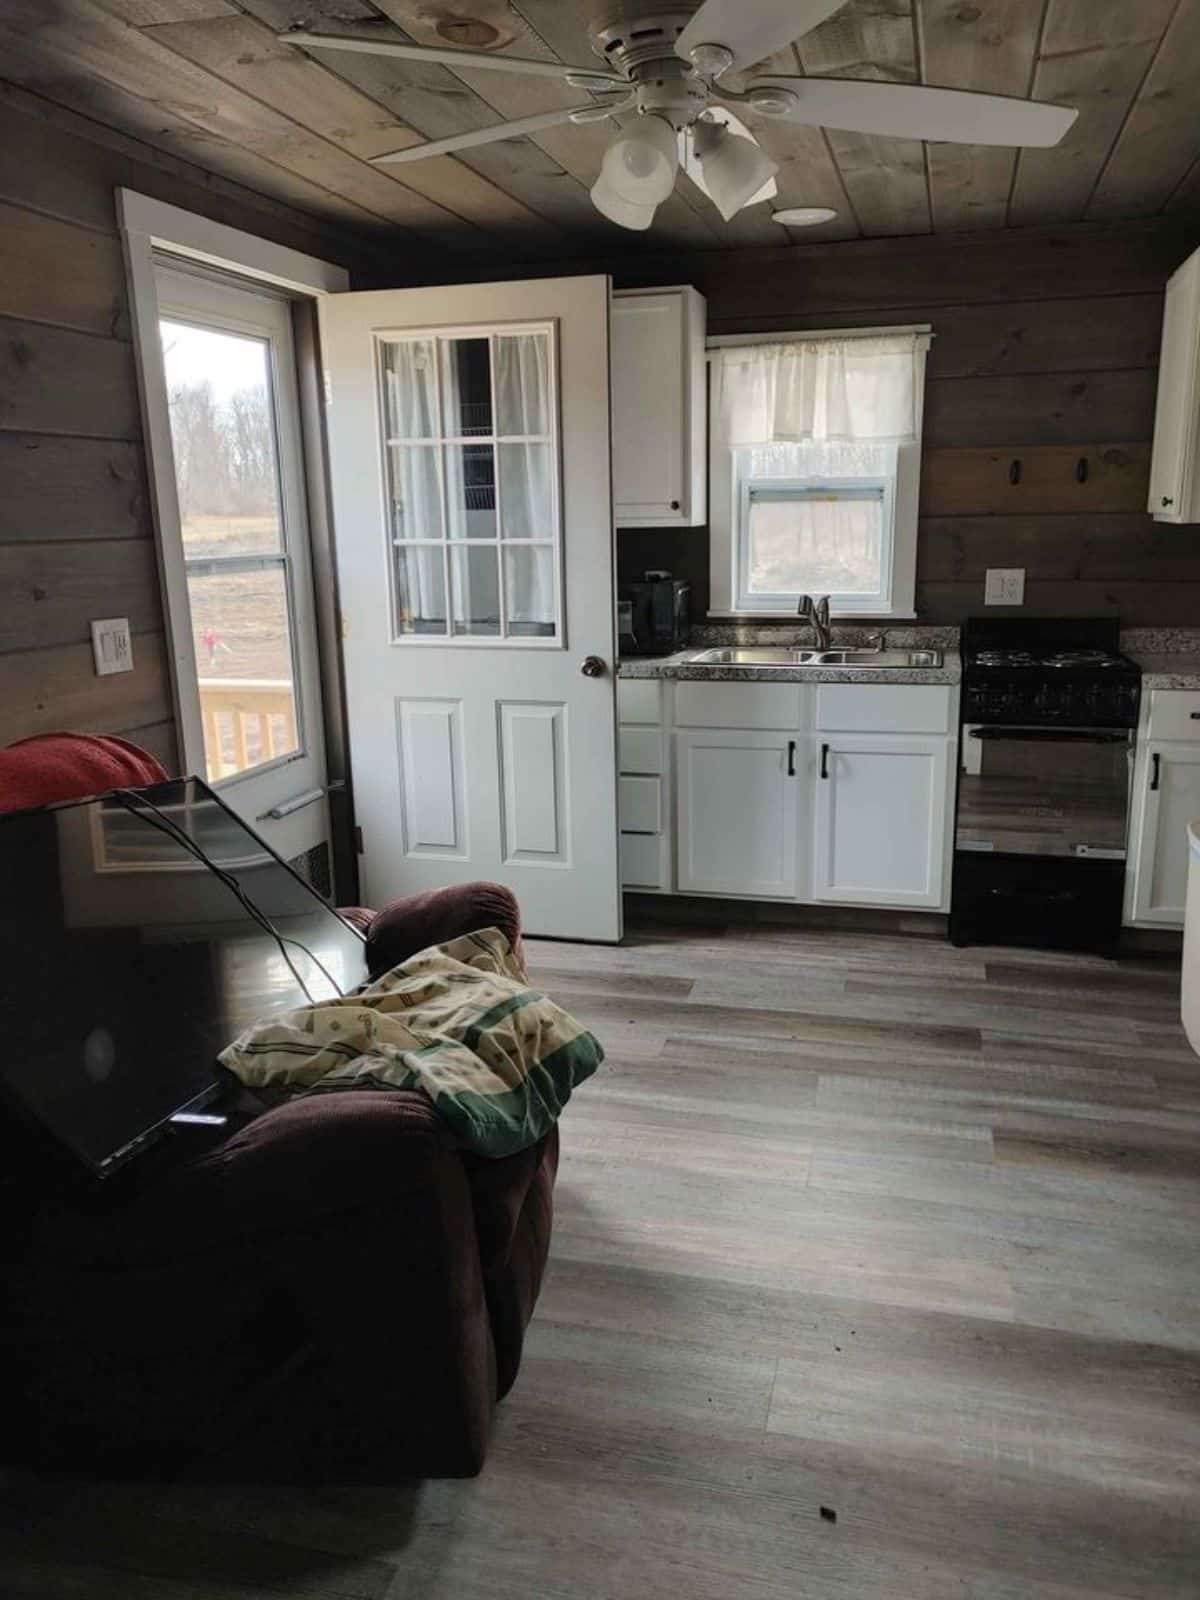 Interiors of 20’ fully furnished tiny home